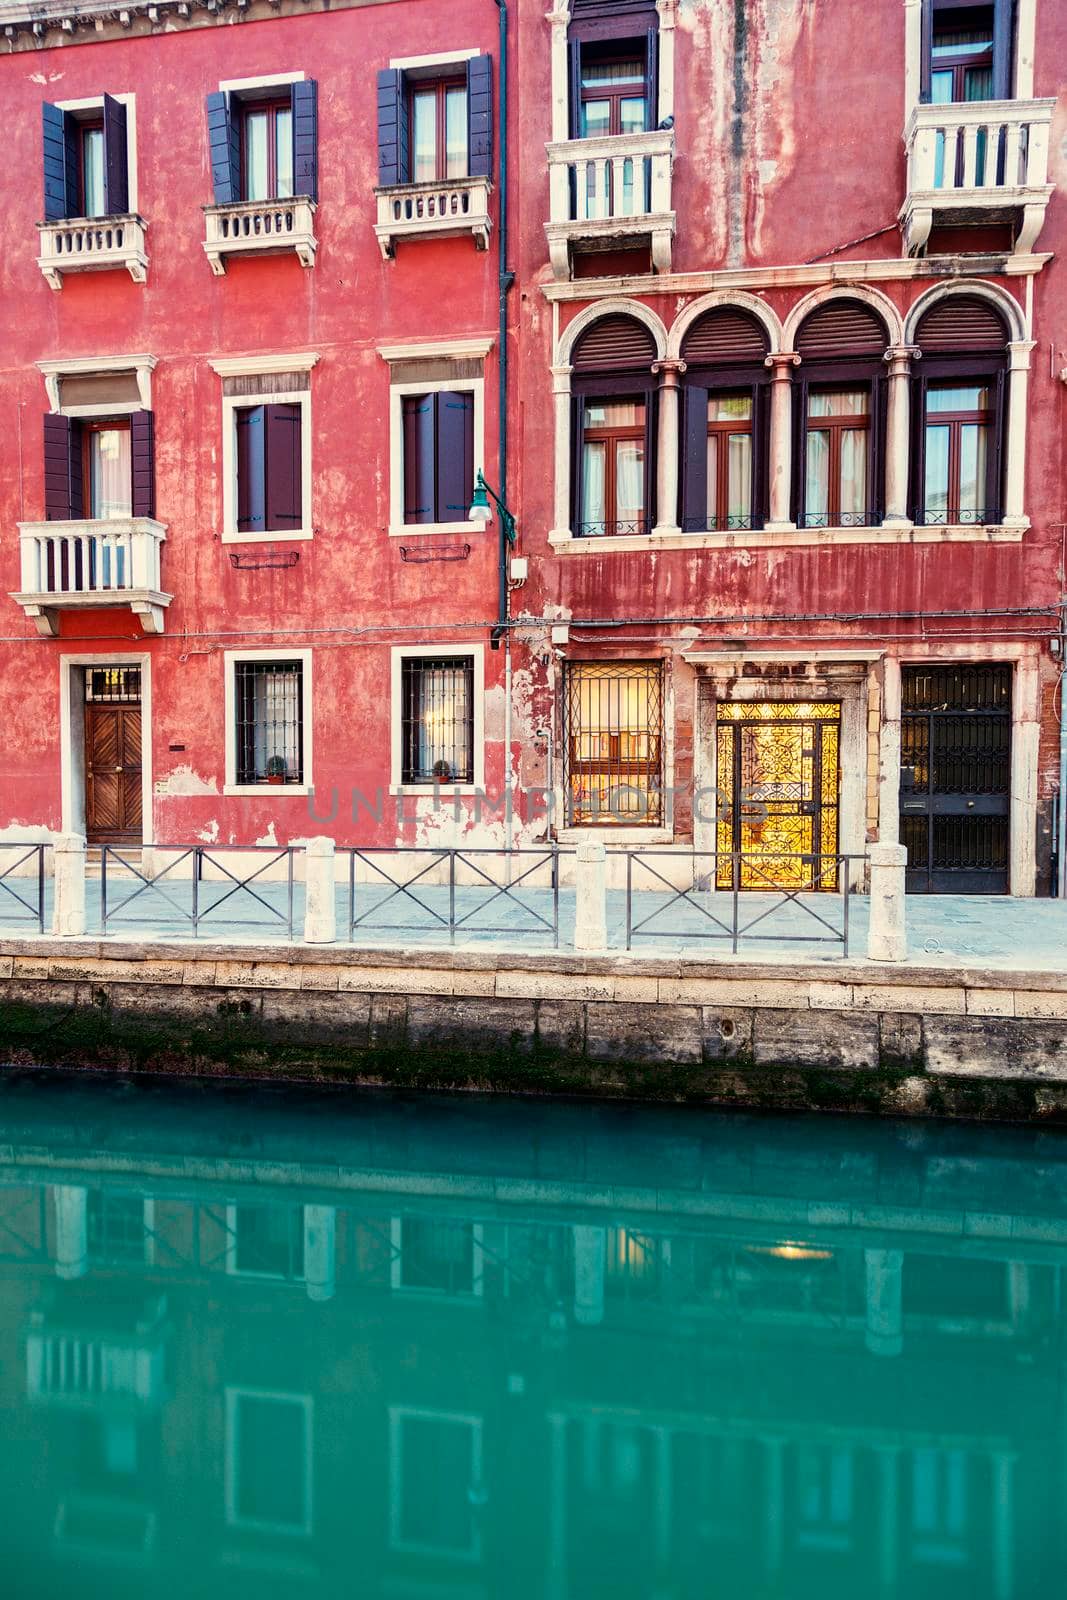 Architecture of Venice - houses reflected in the canal. Venice, Veneto, Italy